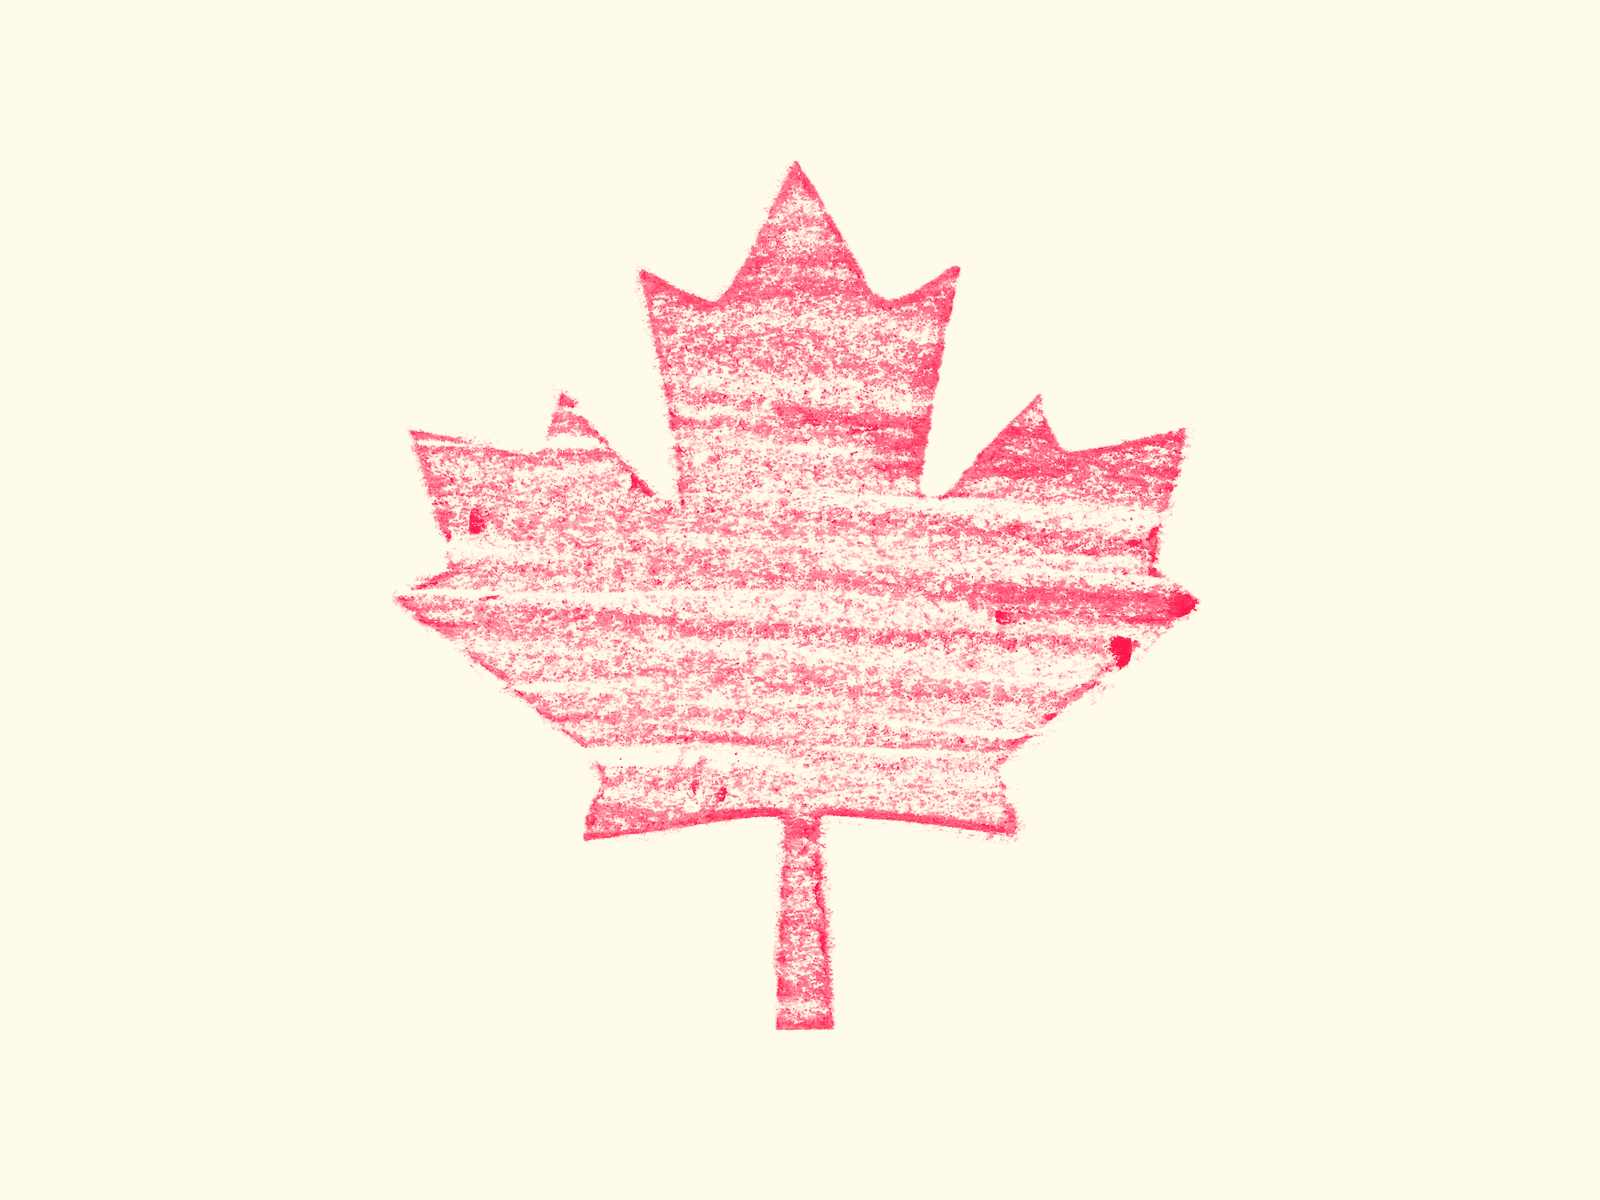 Oh Canada! - Textured animated GIF animation branding canada canada design canada flag colour palette cowboy illustration design gif graphic design illustration logo maple motion graphics sticker tree illustration truegrittexture typography vector western designs